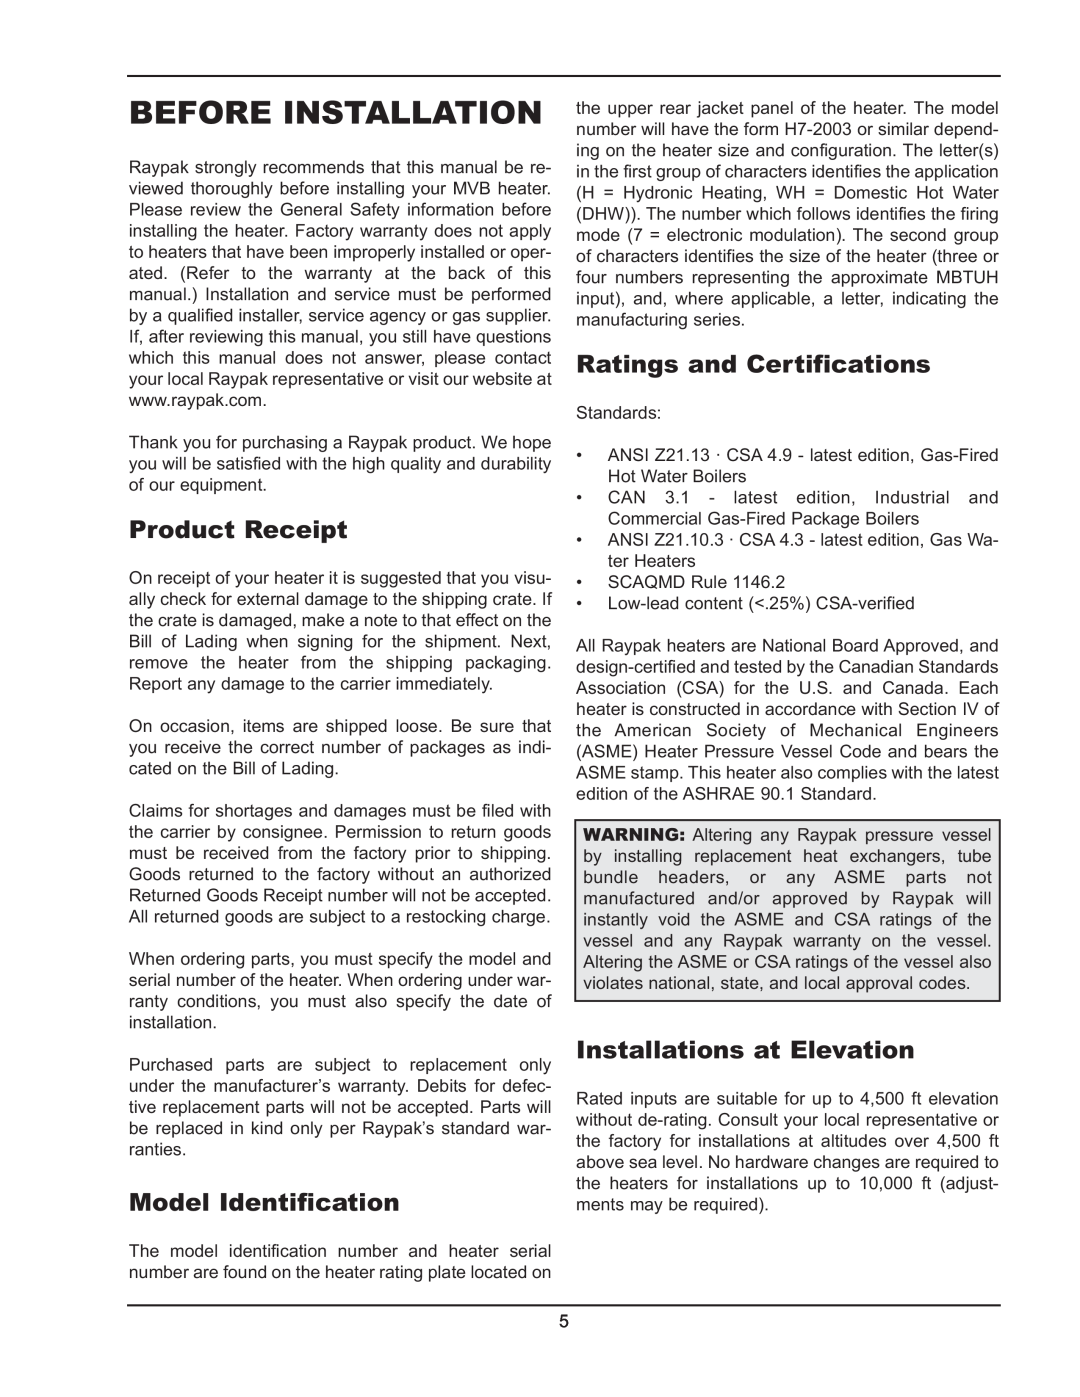 Raypak 503-2003 manual Before Installation, Product Receipt, Model Identification, Ratings and Certifications 